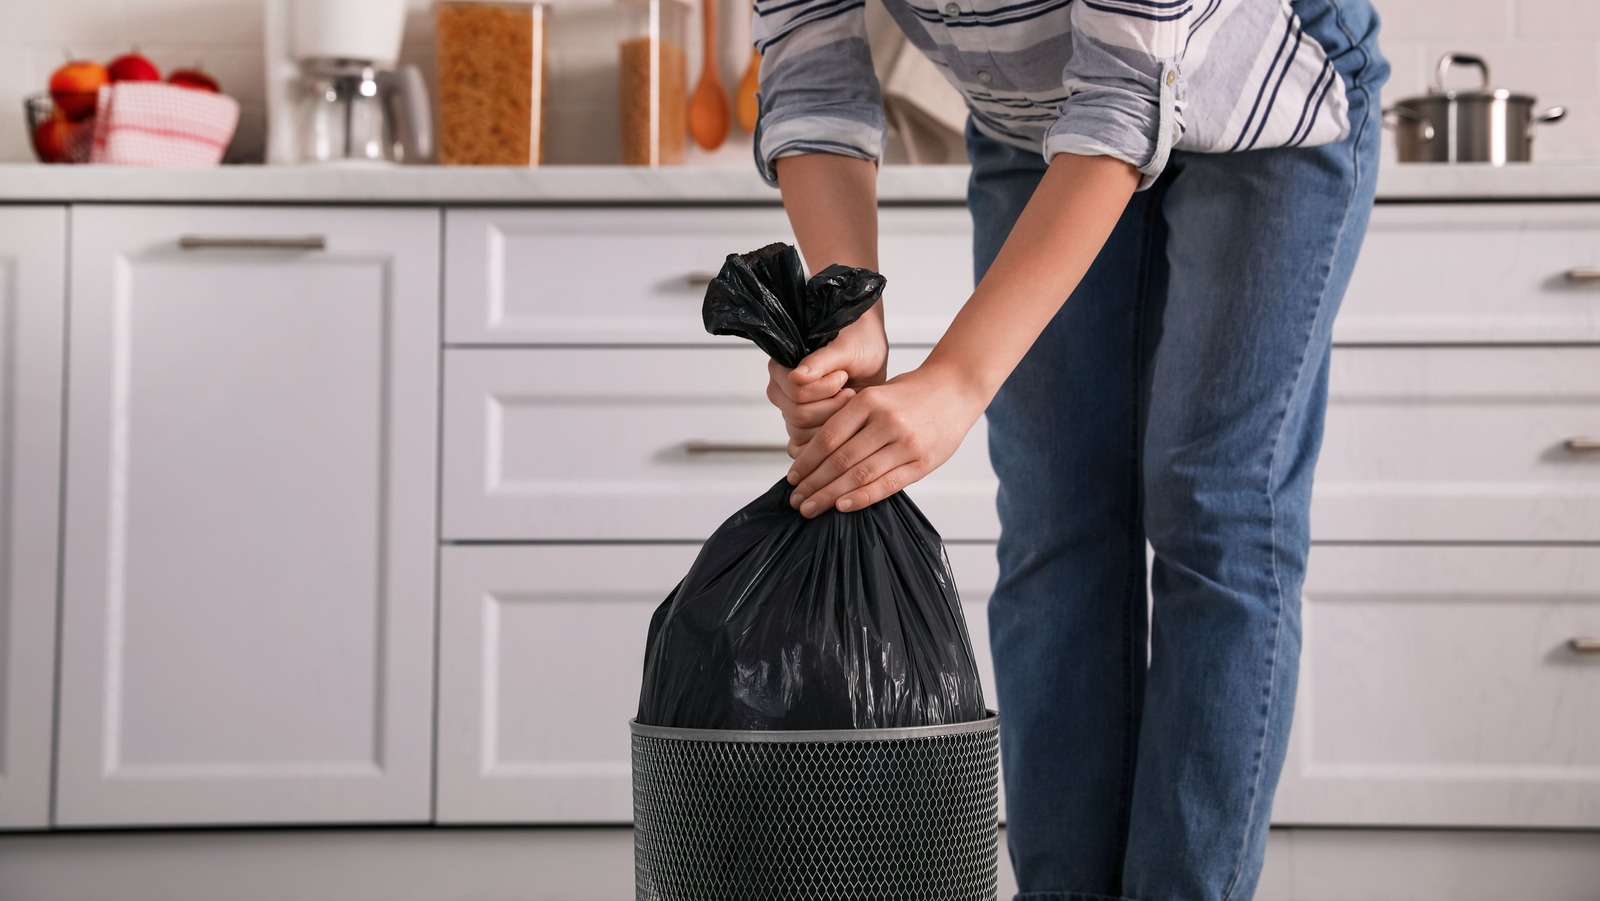 https://www.housedigest.com/img/gallery/the-tiktok-garbage-bag-hack-and-if-its-worth-listening-to/l-intro-1680801787.jpg